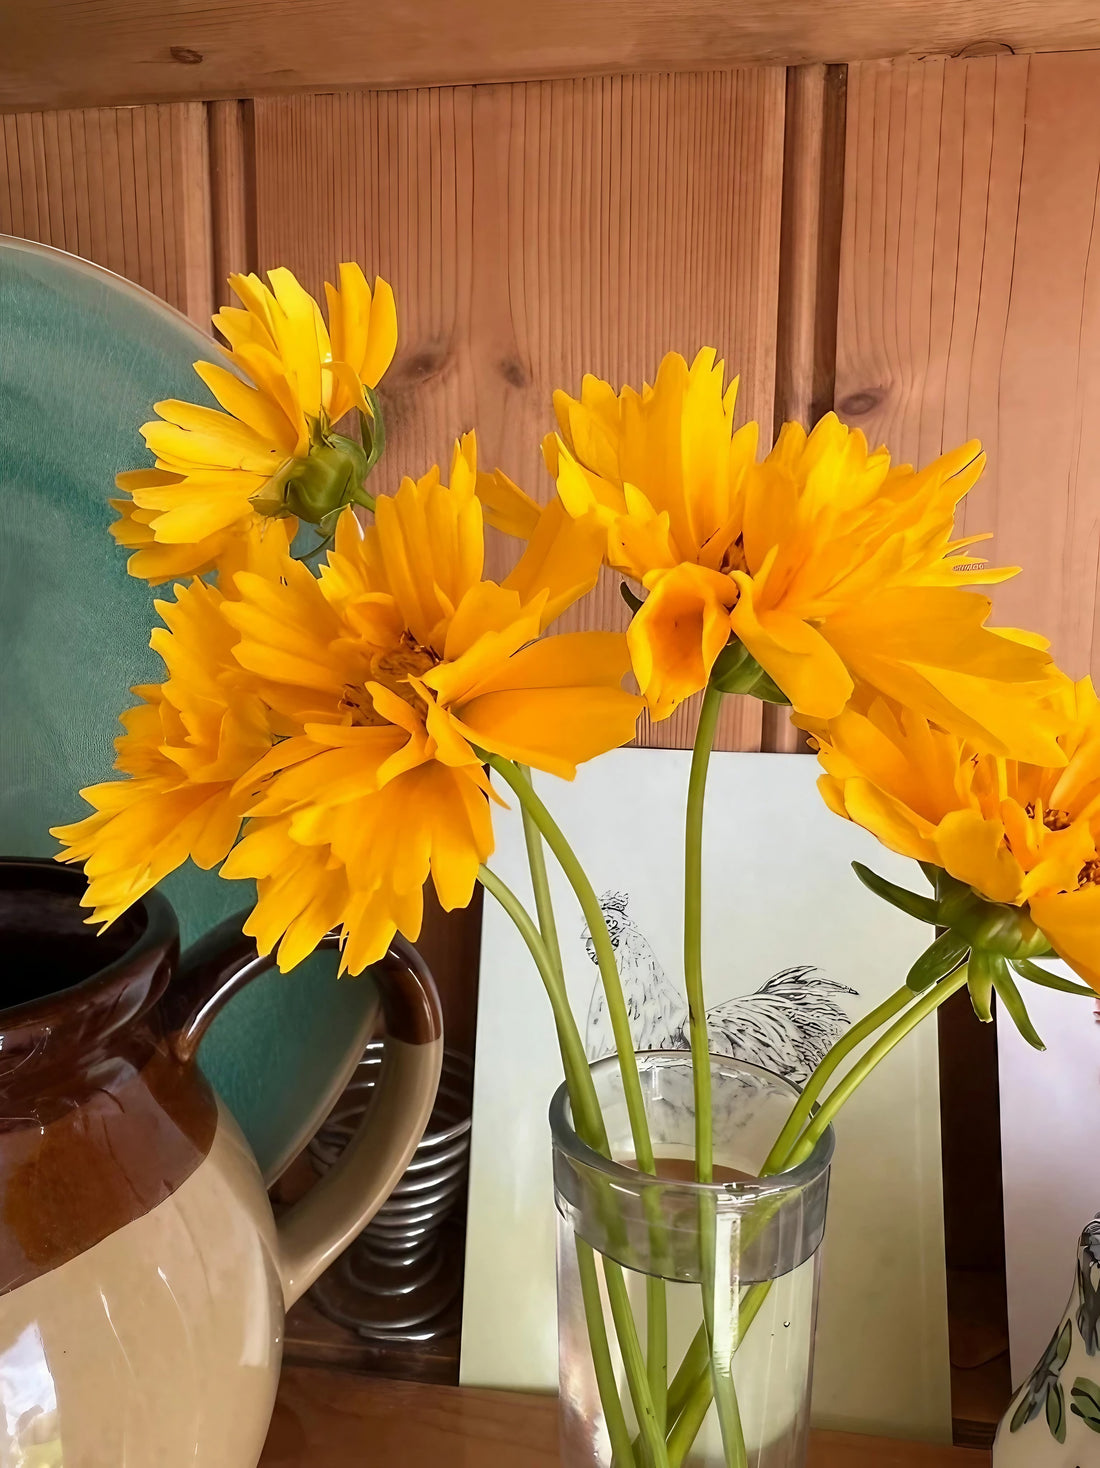 Coreopsis Early Sunrise bouquet in a vase on a shelf